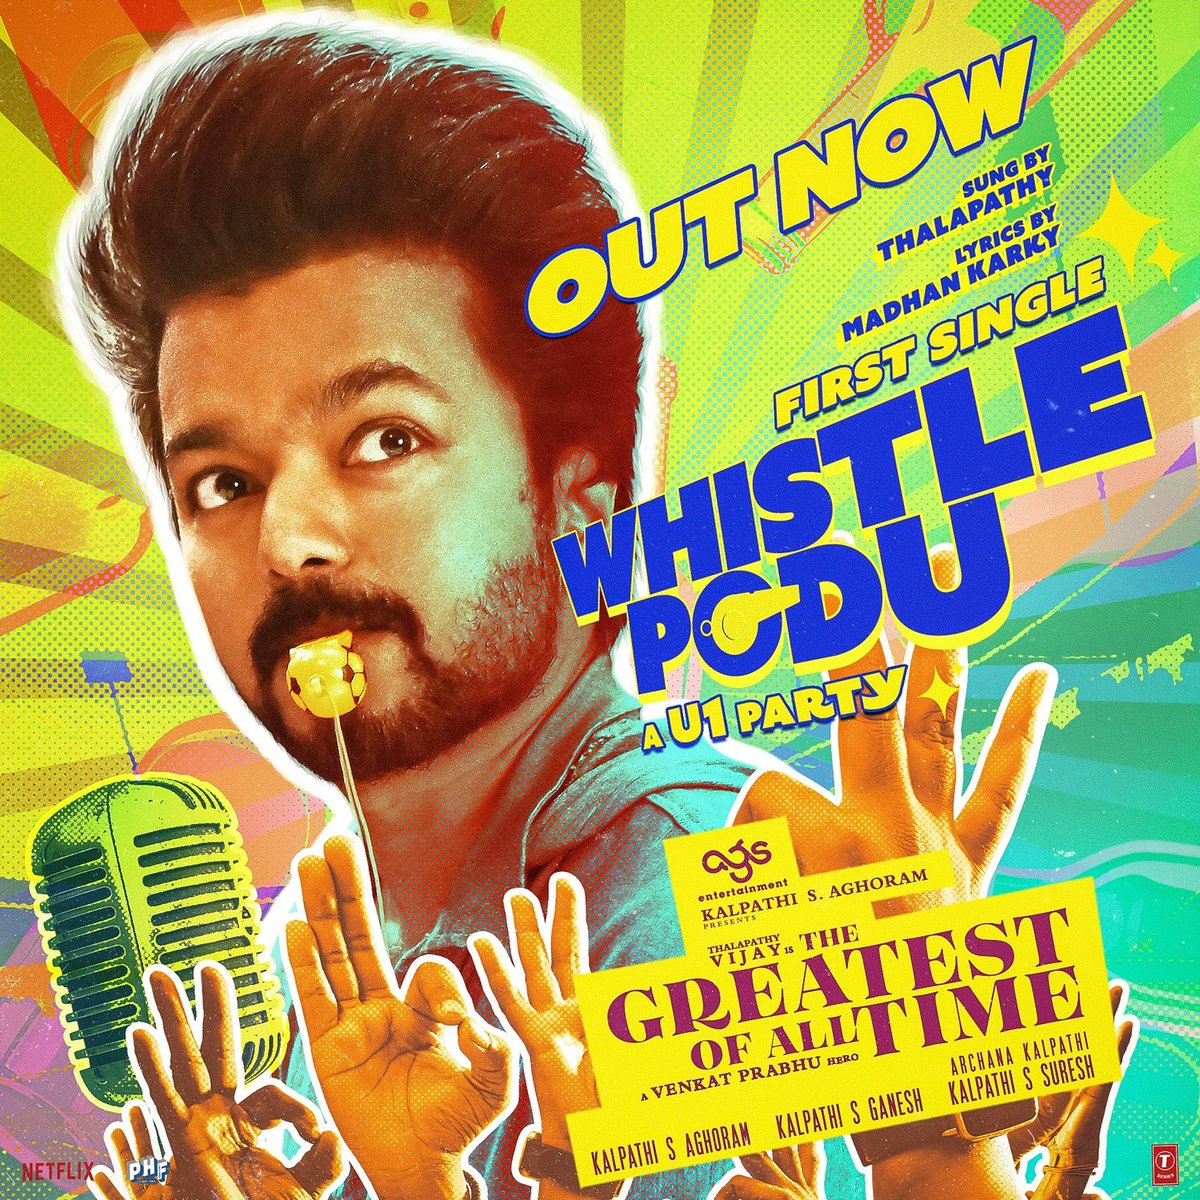 Get your dancing shoes on and let's shake it to the electrifying vibes of #WhistlePodu ! 🎵 Song Out Now youtube.com/watch?v=5GSt99… A @actorvijay Sir vocal A @thisisysr party A @vp_offl Hero Lyrics by @madhankarky #KalpathiSAghoram #KalpathiSGanesh #KalpathiSSuresh #GOAT…